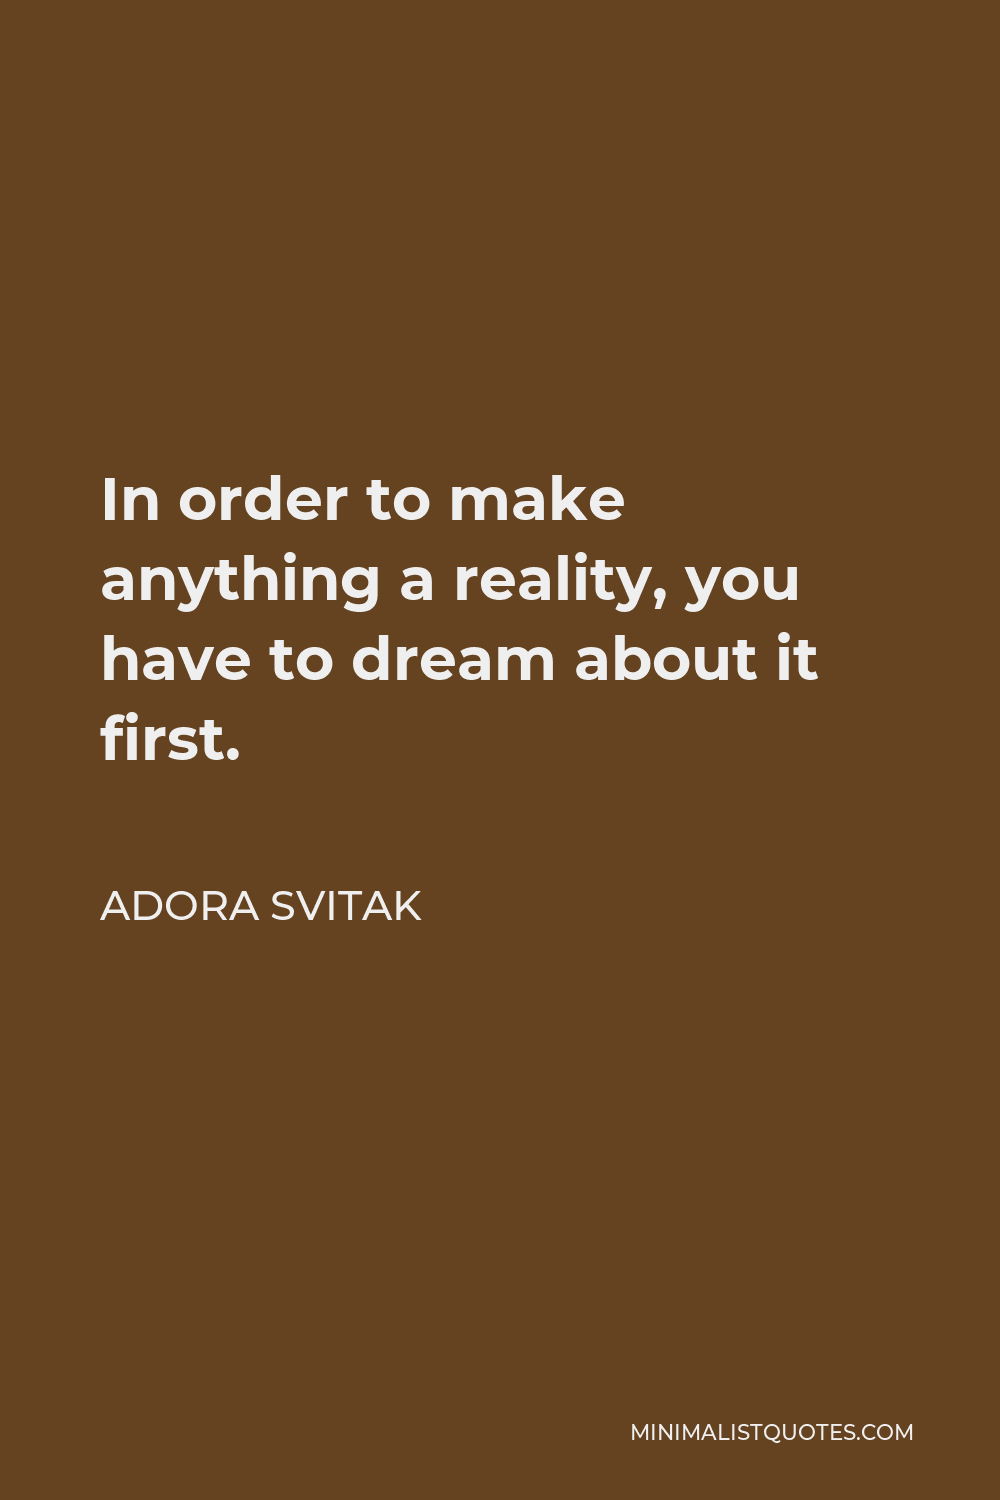 Adora Svitak Quote - In order to make anything a reality, you have to dream about it first.